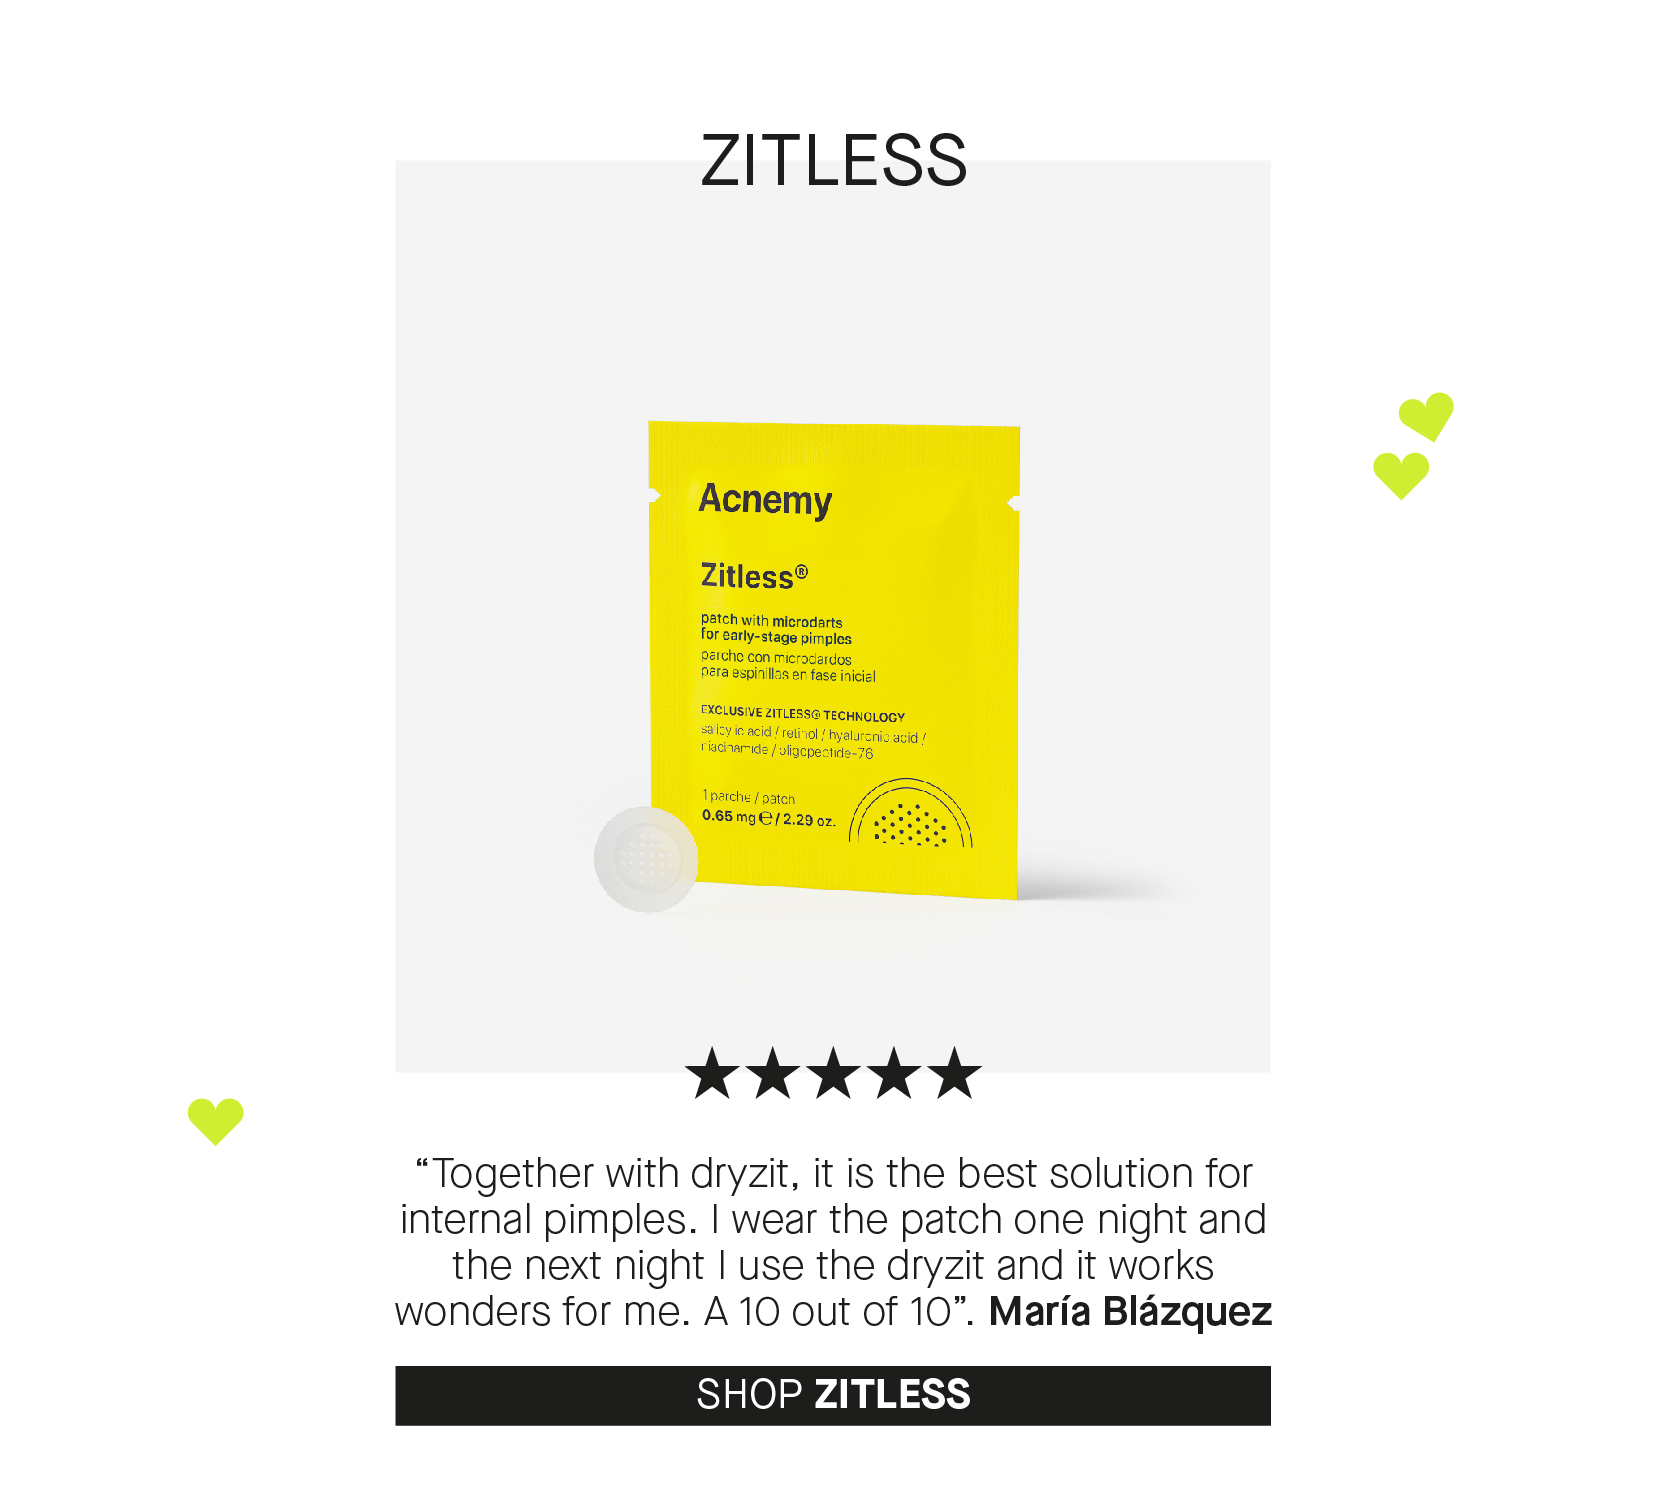 ZITLESS 100,80, 8. Together with dryzit, it is the best solution for internal pimples. wear the patch one night and the next night use the dryzit and it works wonders for me. A 10 out of 10. Maria Blazquez SHOP ZITLESS 